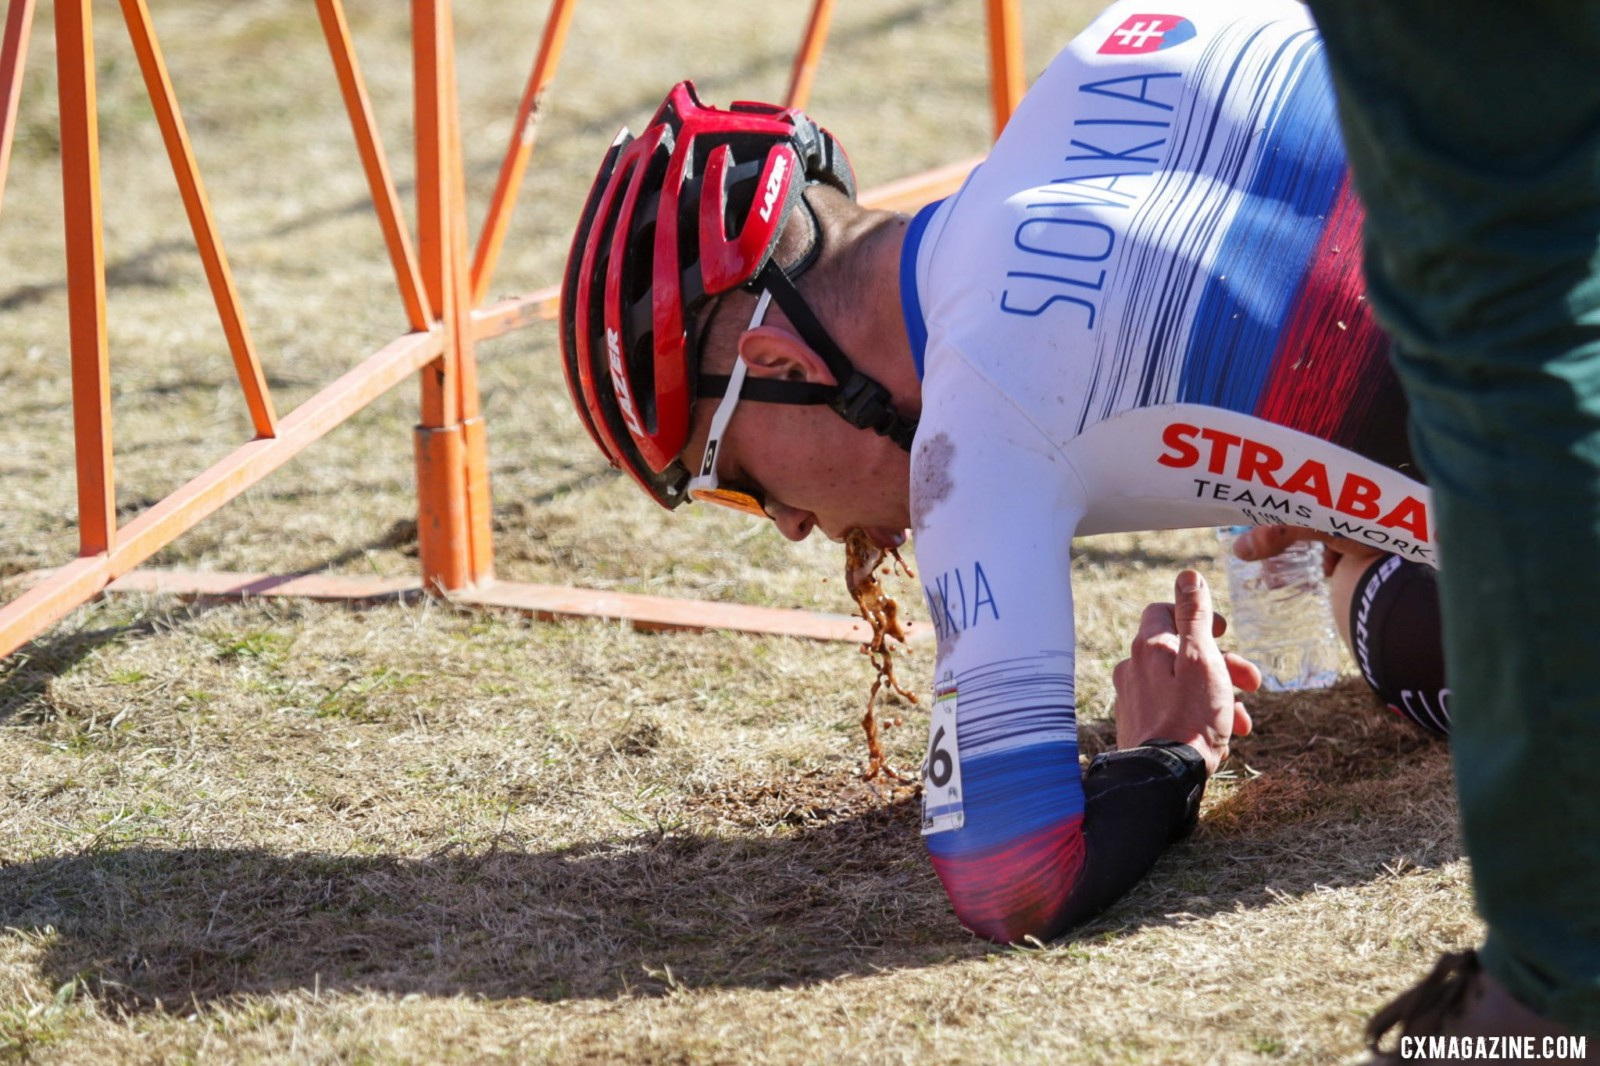 A Slovakian made sure he left it all out on the course. Junior Men. 2022 Cyclocross World Championships, Fayetteville, Arkansas USA. © D. Mable / Cyclocross Magazine